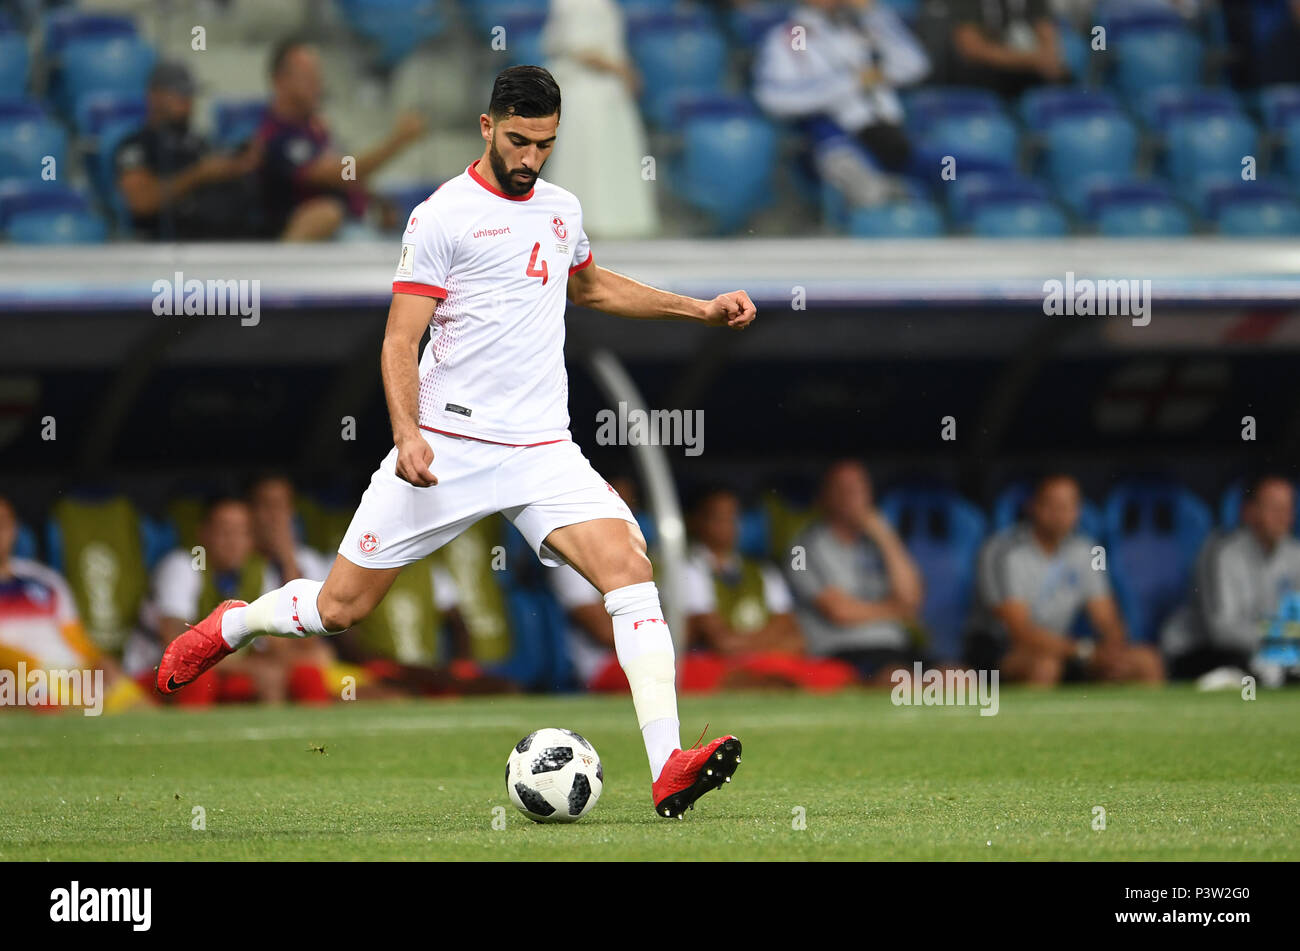 Volgograd, Russia. 18th June, 2018. Soccer: World Cup, Tunisia vs England, group stages, group G, Volgograd Stadium. Tunisia's Yassine Meriah in action. Credit: Andreas Gebert/dpa/Alamy Live News Stock Photo